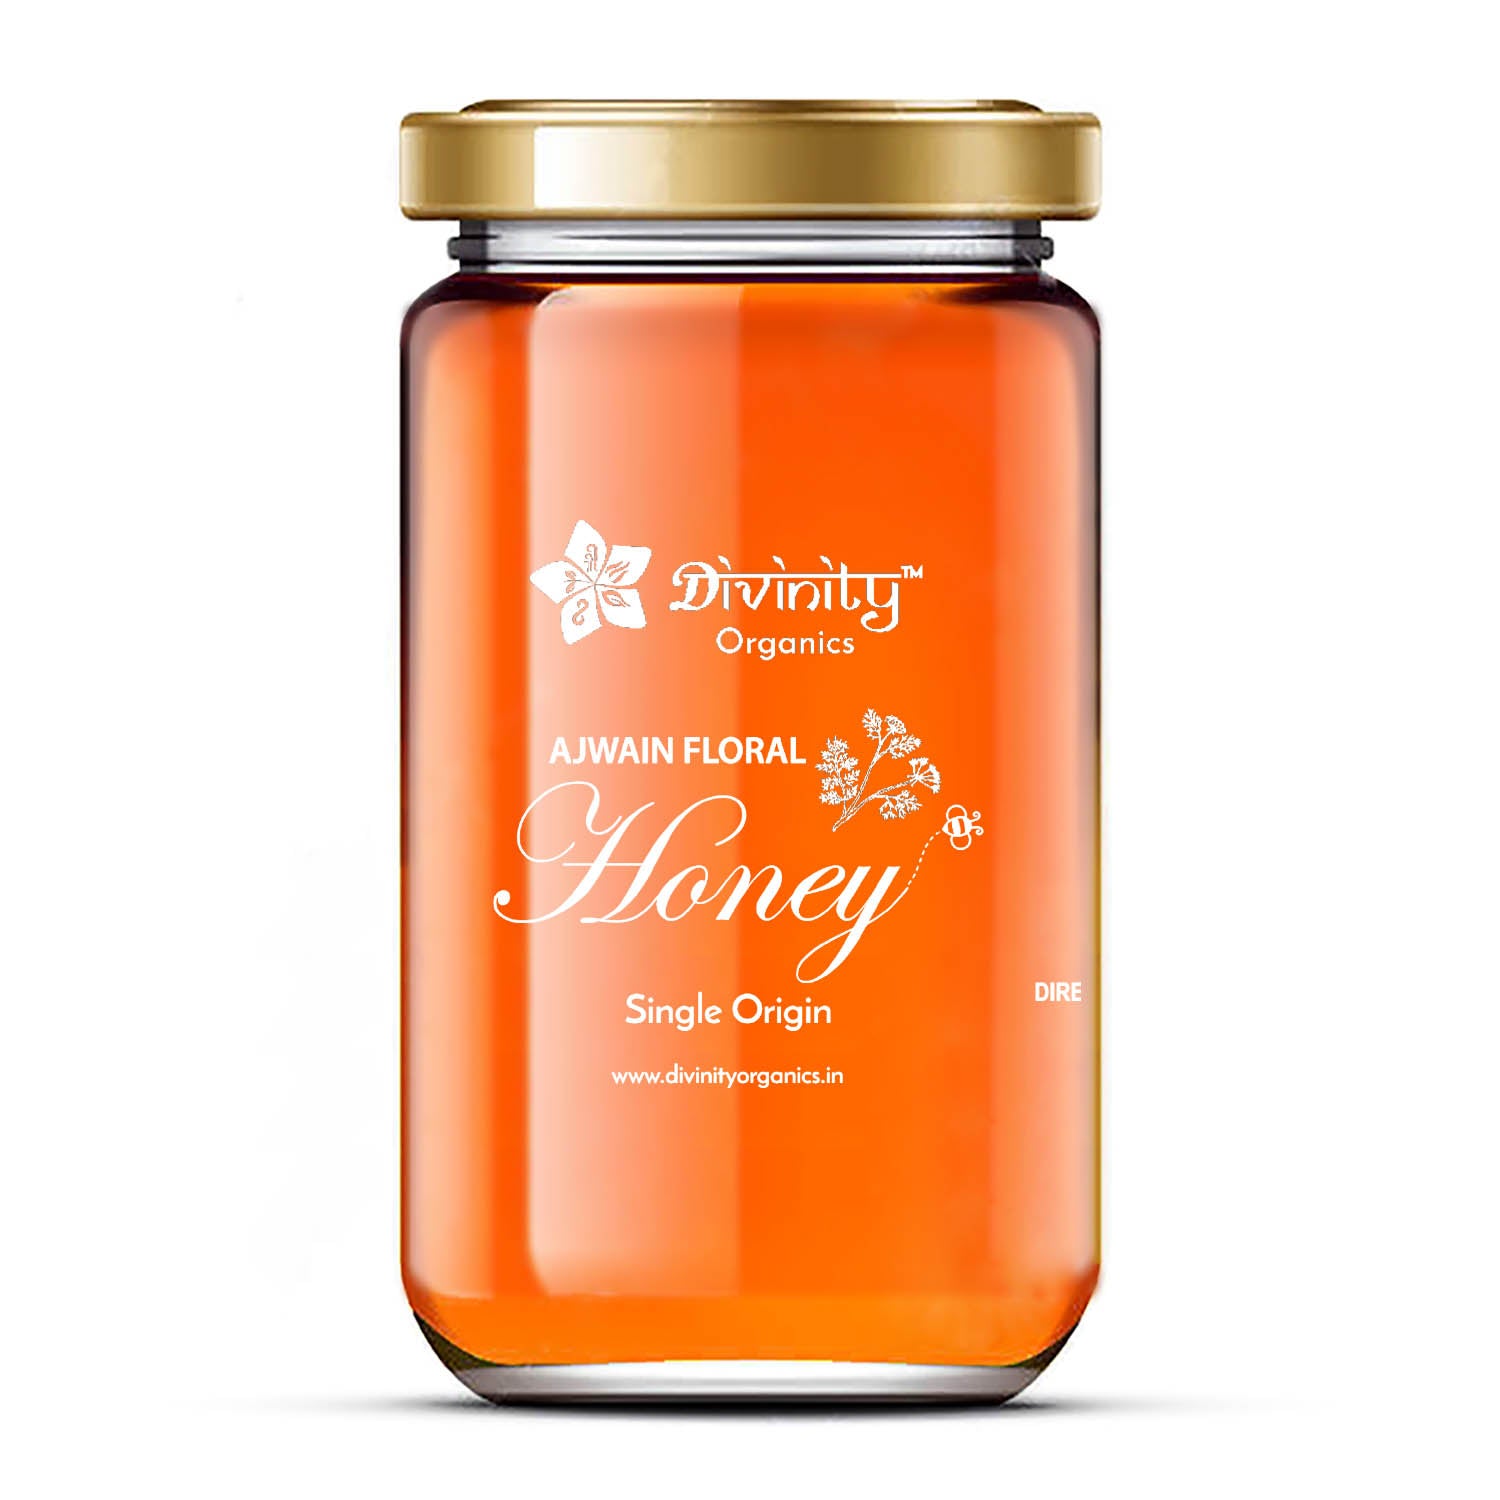 Divinity Organics DesiKikar FloralHoney Procured from the Meli Ferra bees found in the open dry wild forest of Morena in Madhya Pradesh, Kikar (Babool) honey is the most commonly found in the month of April. With a wide spectrum of health benefits, this honey also regulates healthy cellular activity in your body. Kikar's scientific name is Acacia karoo which are small, thorny trees that grow as high as 7-12 meters. It is one of the rarest kinds of honey in India.